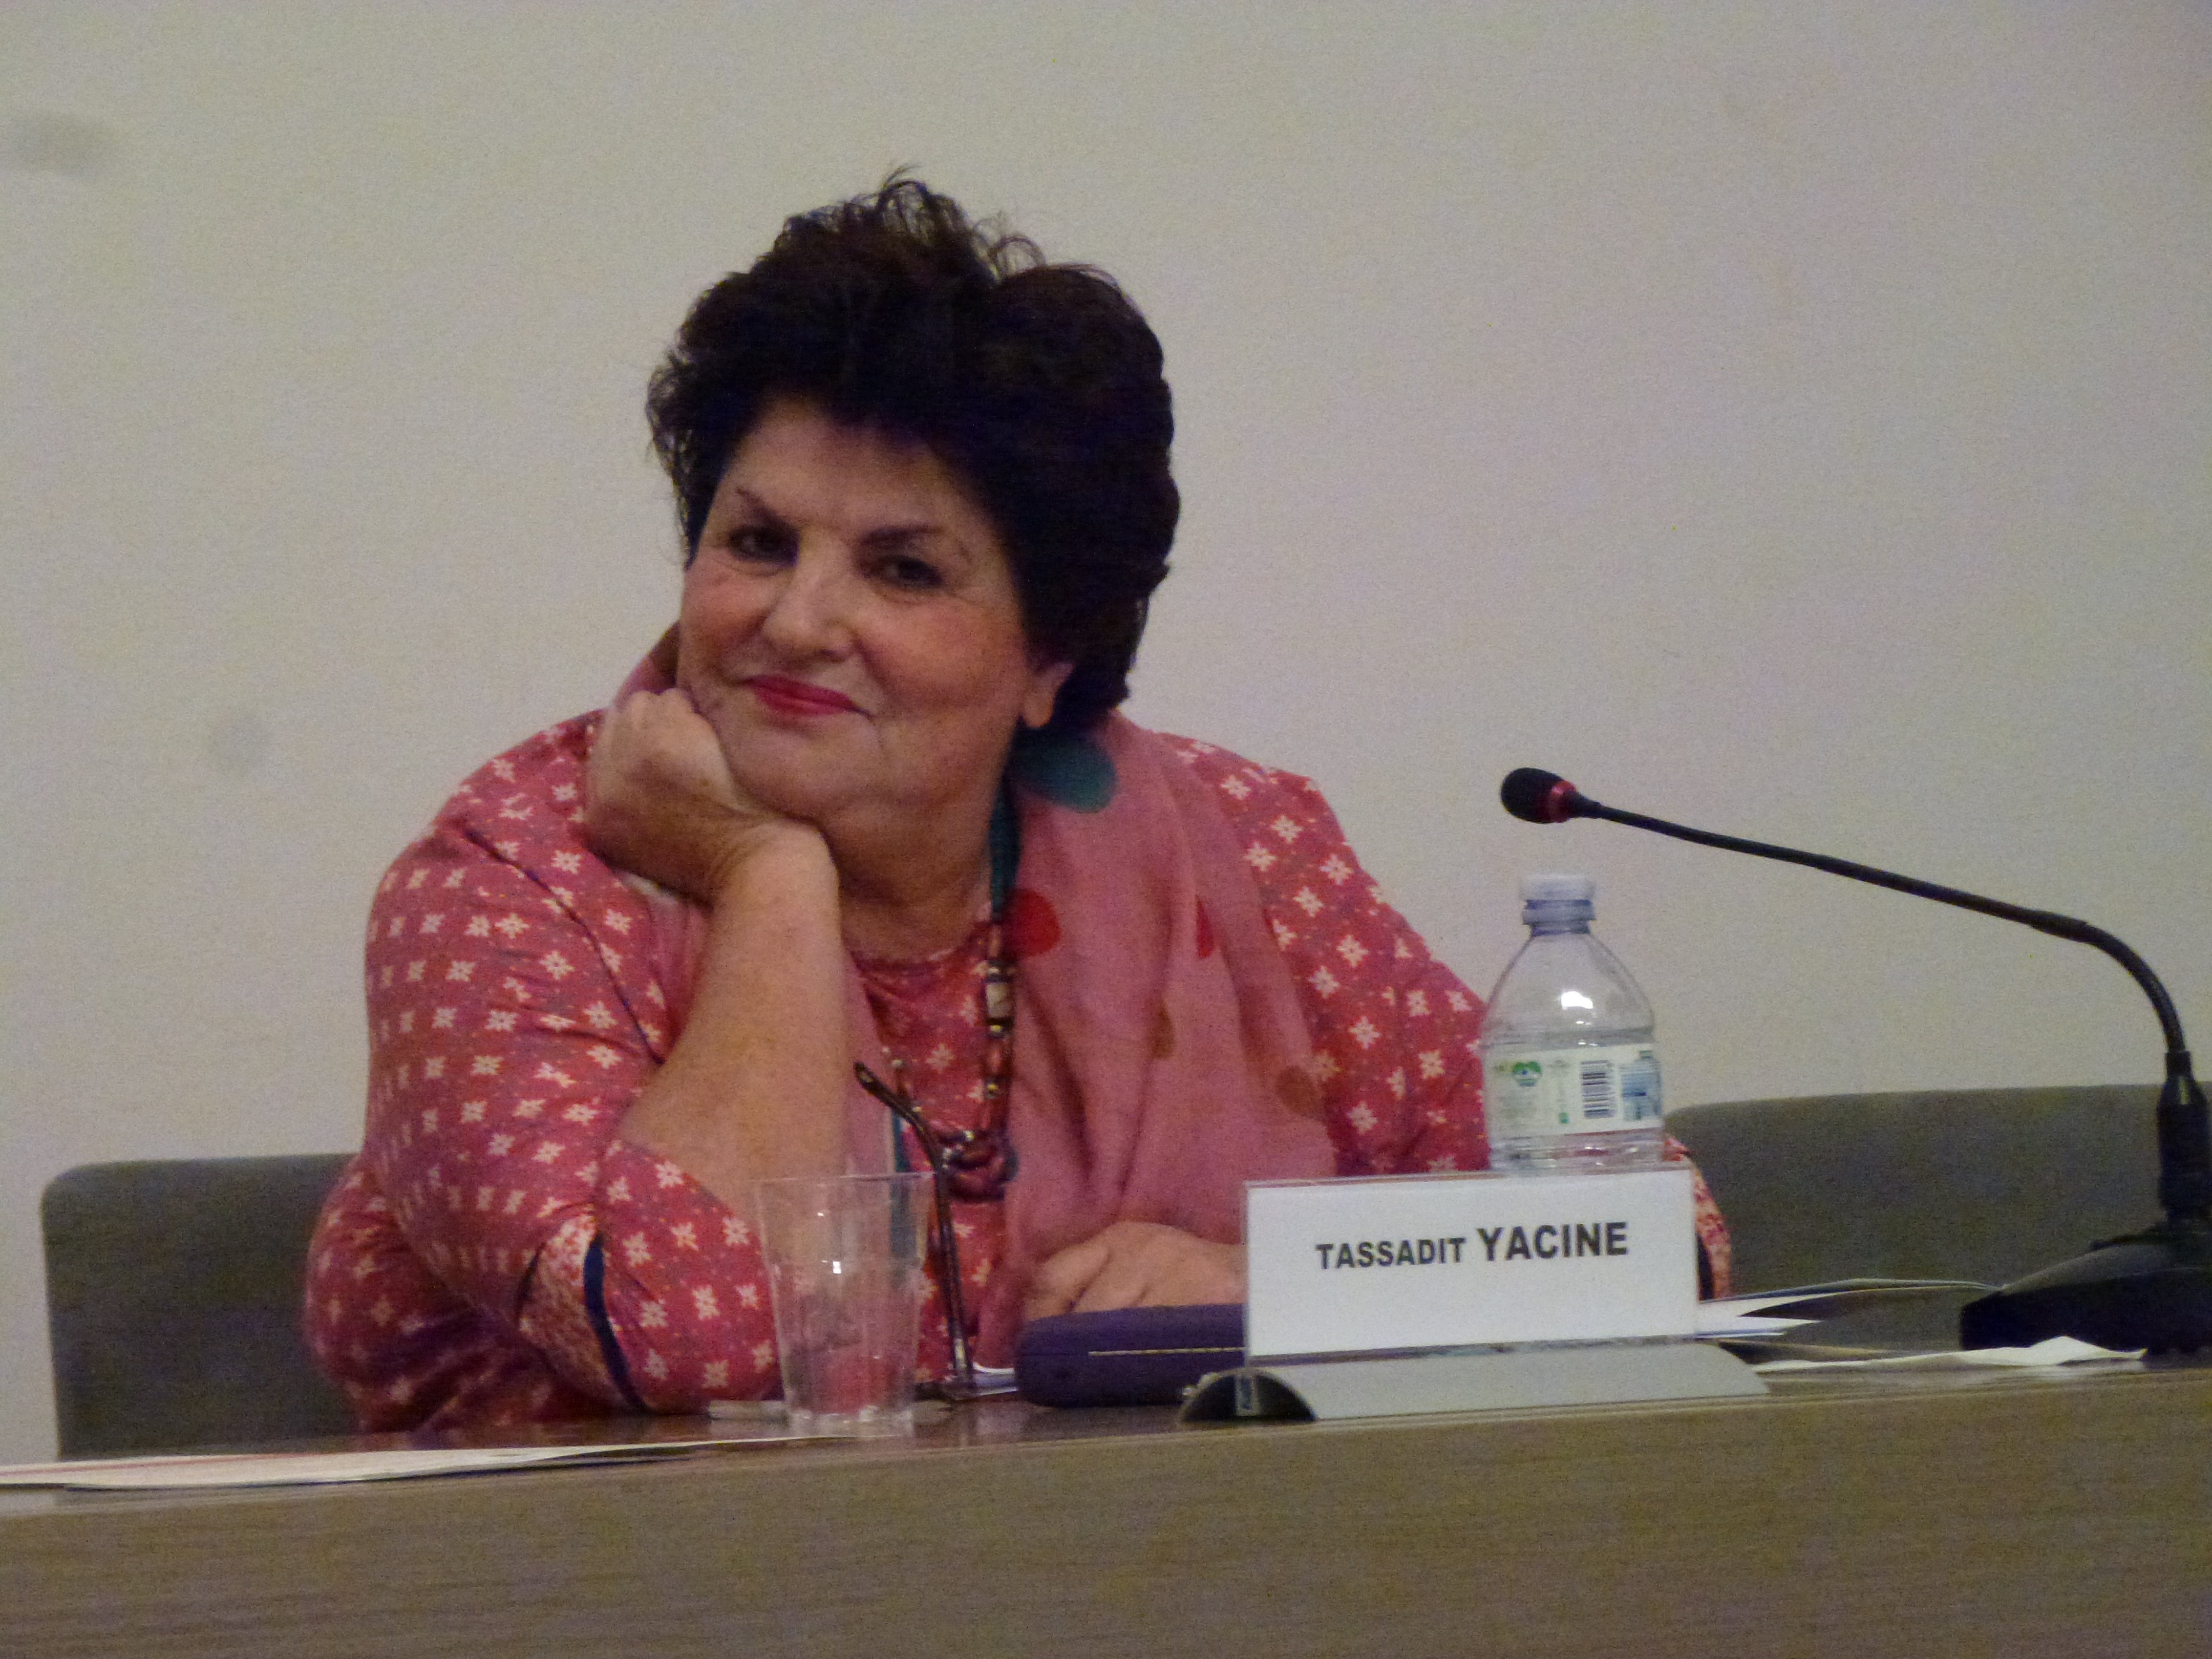 Yacine speaking at a conference in 2015